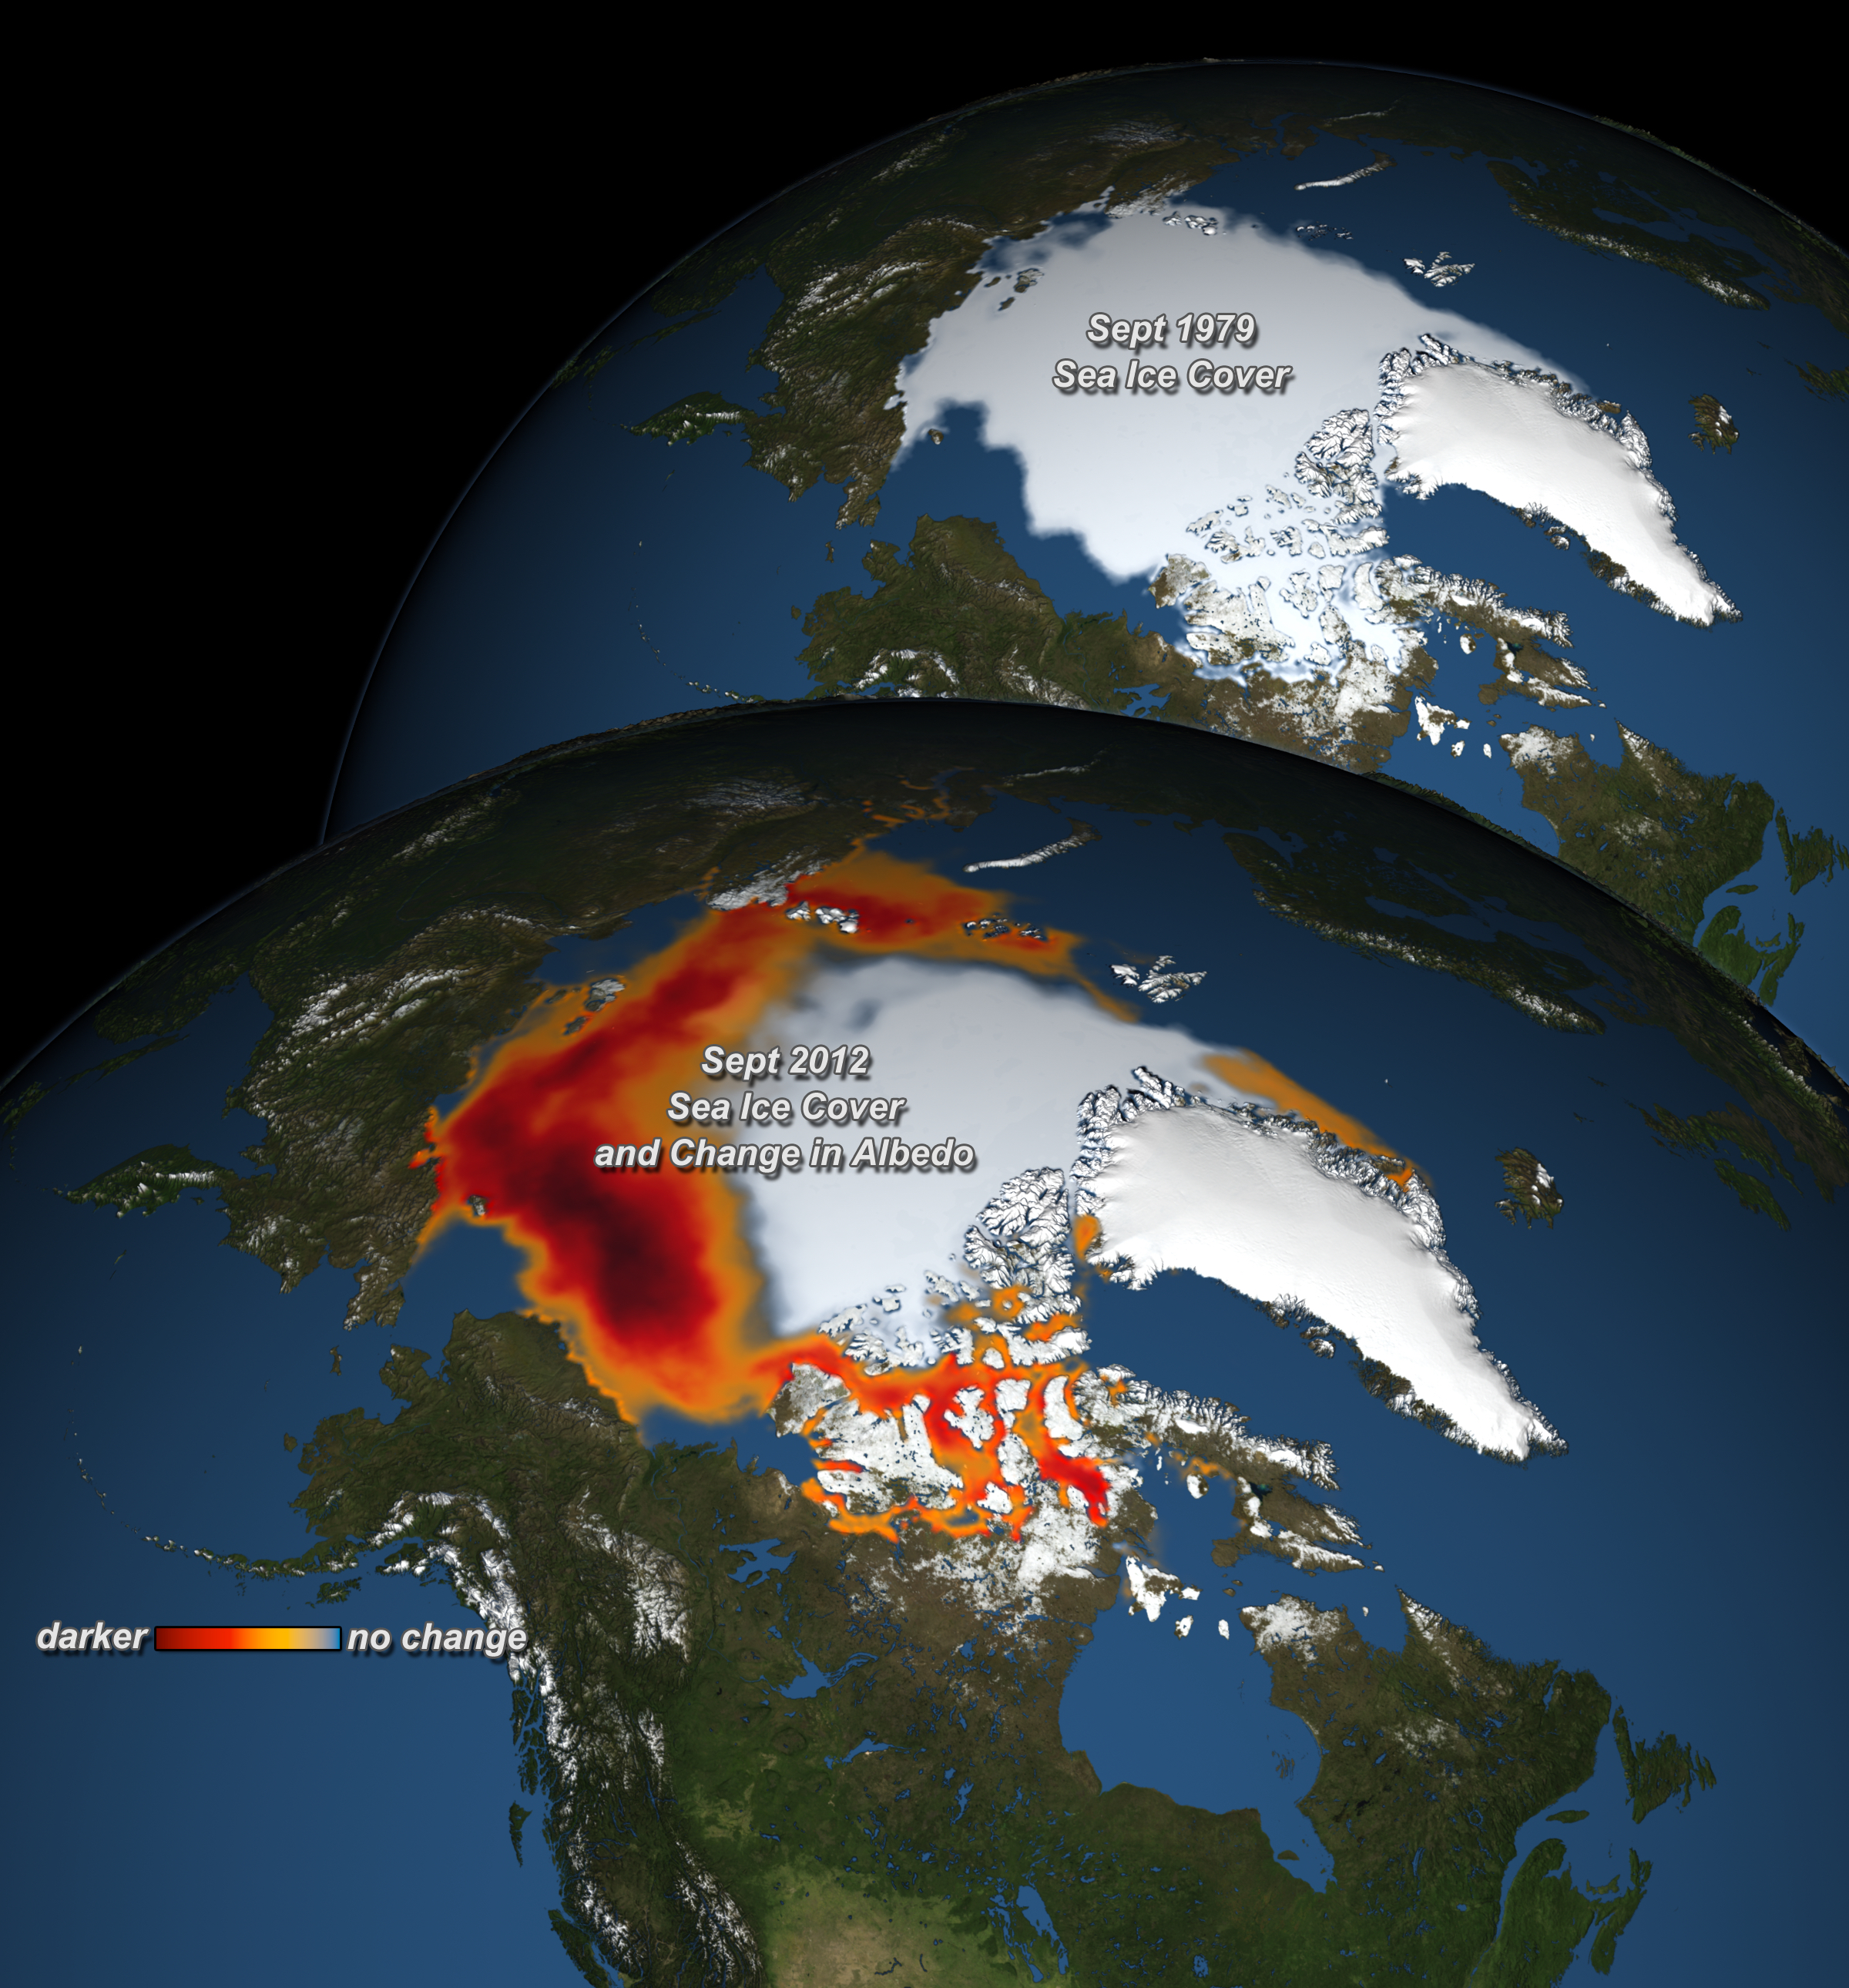 https://nsidc.org/sites/default/files/images/cover_red_with_labels.jpg